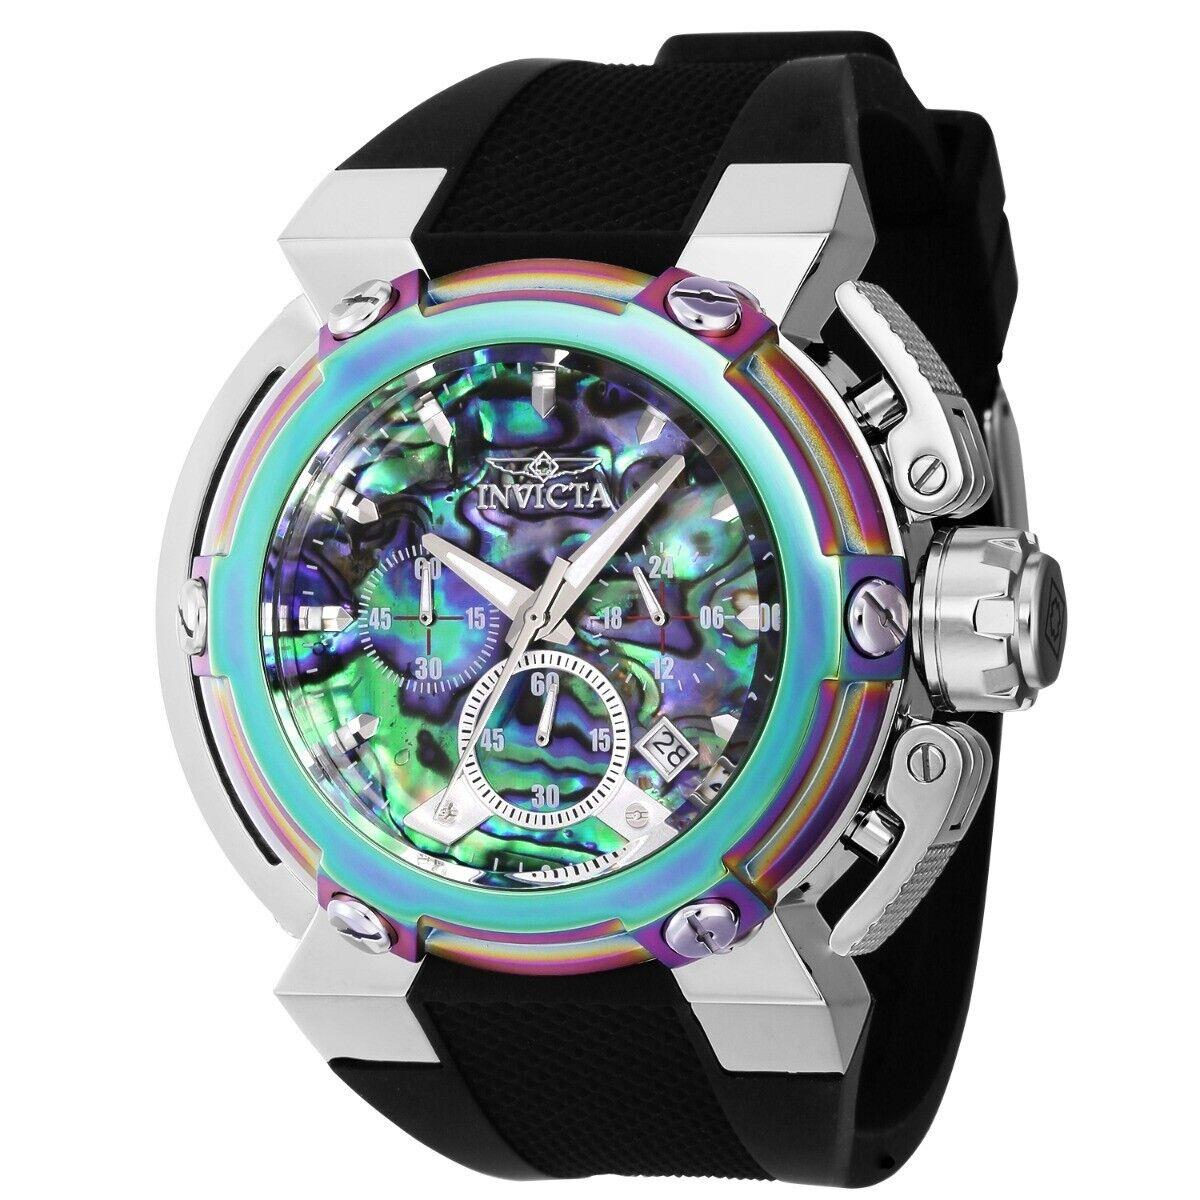 Invicta X-wing Coalition Forces Mens Watch Abalone Dial Chronograph - Green, Blue Dial, Black Band